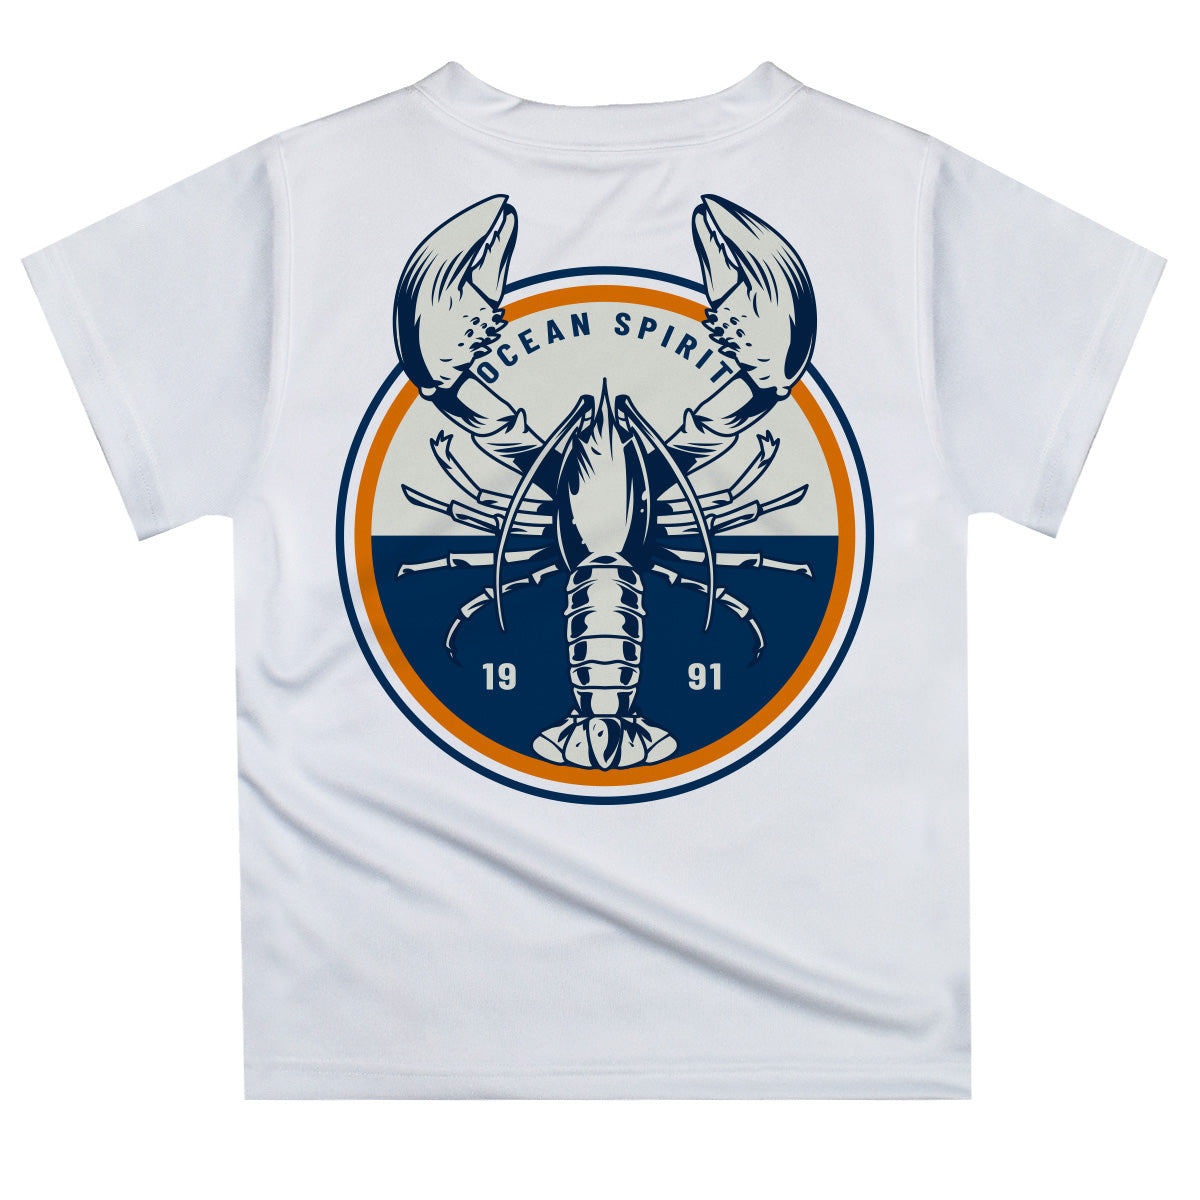 Nautical Lobster White Short Sleeve Tee Shirt With Pocket - Wimziy&Co.